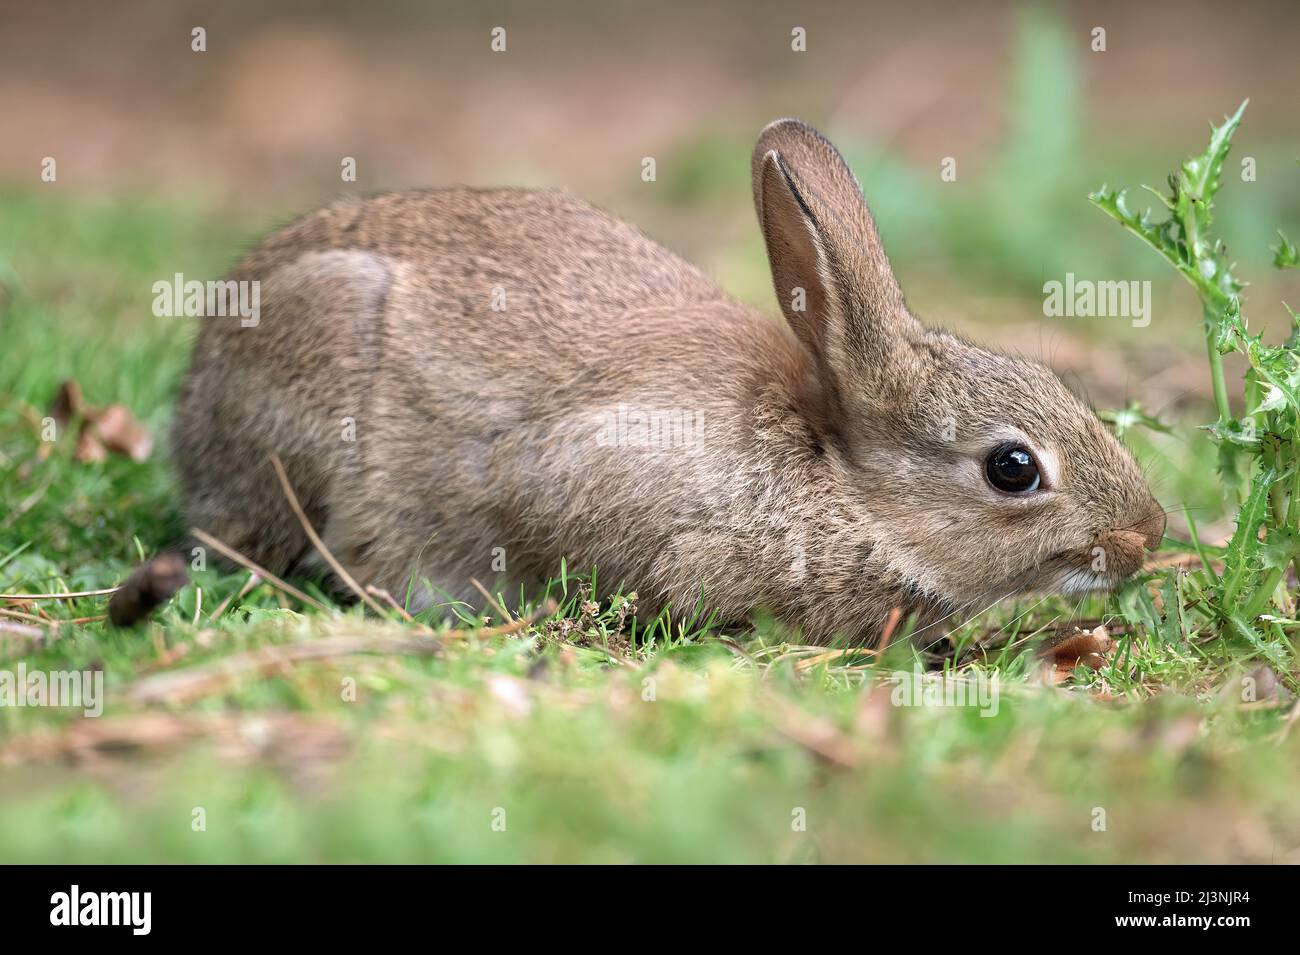 Rabbit baby sitting on the grass, smelling a dandelion plant, close up in Scotland in the summer time Stock Photo